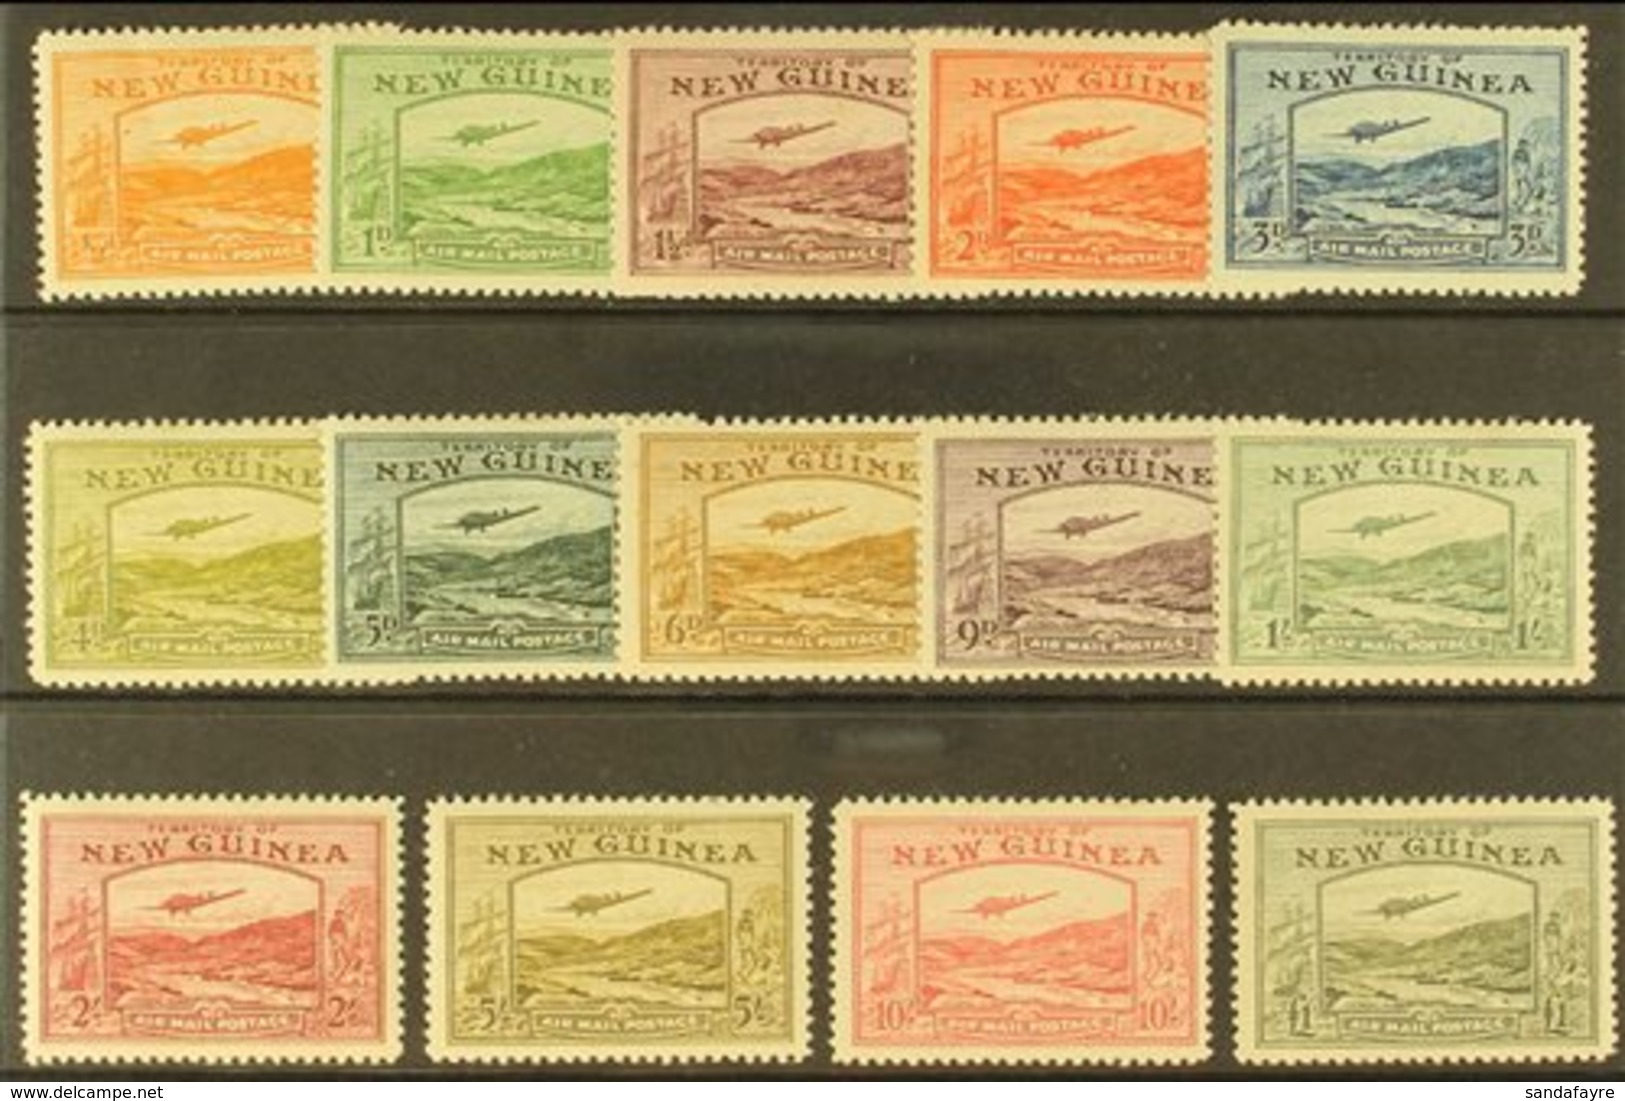 1939 AIRMAILS Bulolo Goldfields Set Inscribed "AIRMAIL POSTAGE," SG 212/25, Mint With Gently Toned Gum, Cat £1100 (14 St - Papua New Guinea